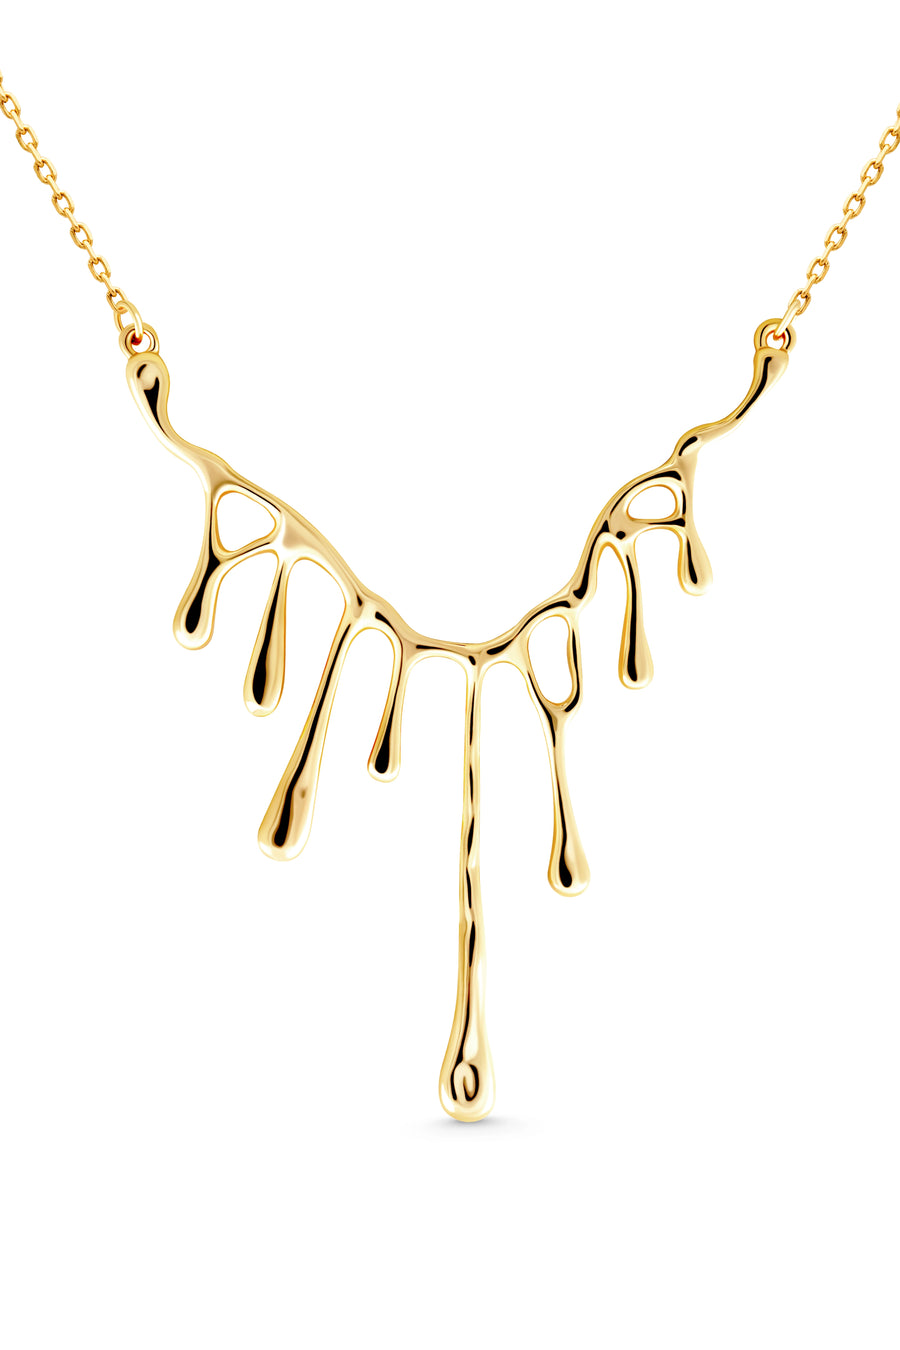 MARVEL Necklace. Pendant featuring a row of melting flows, 18K gold vermeil, handmade, hypoallergenic, water-resistant